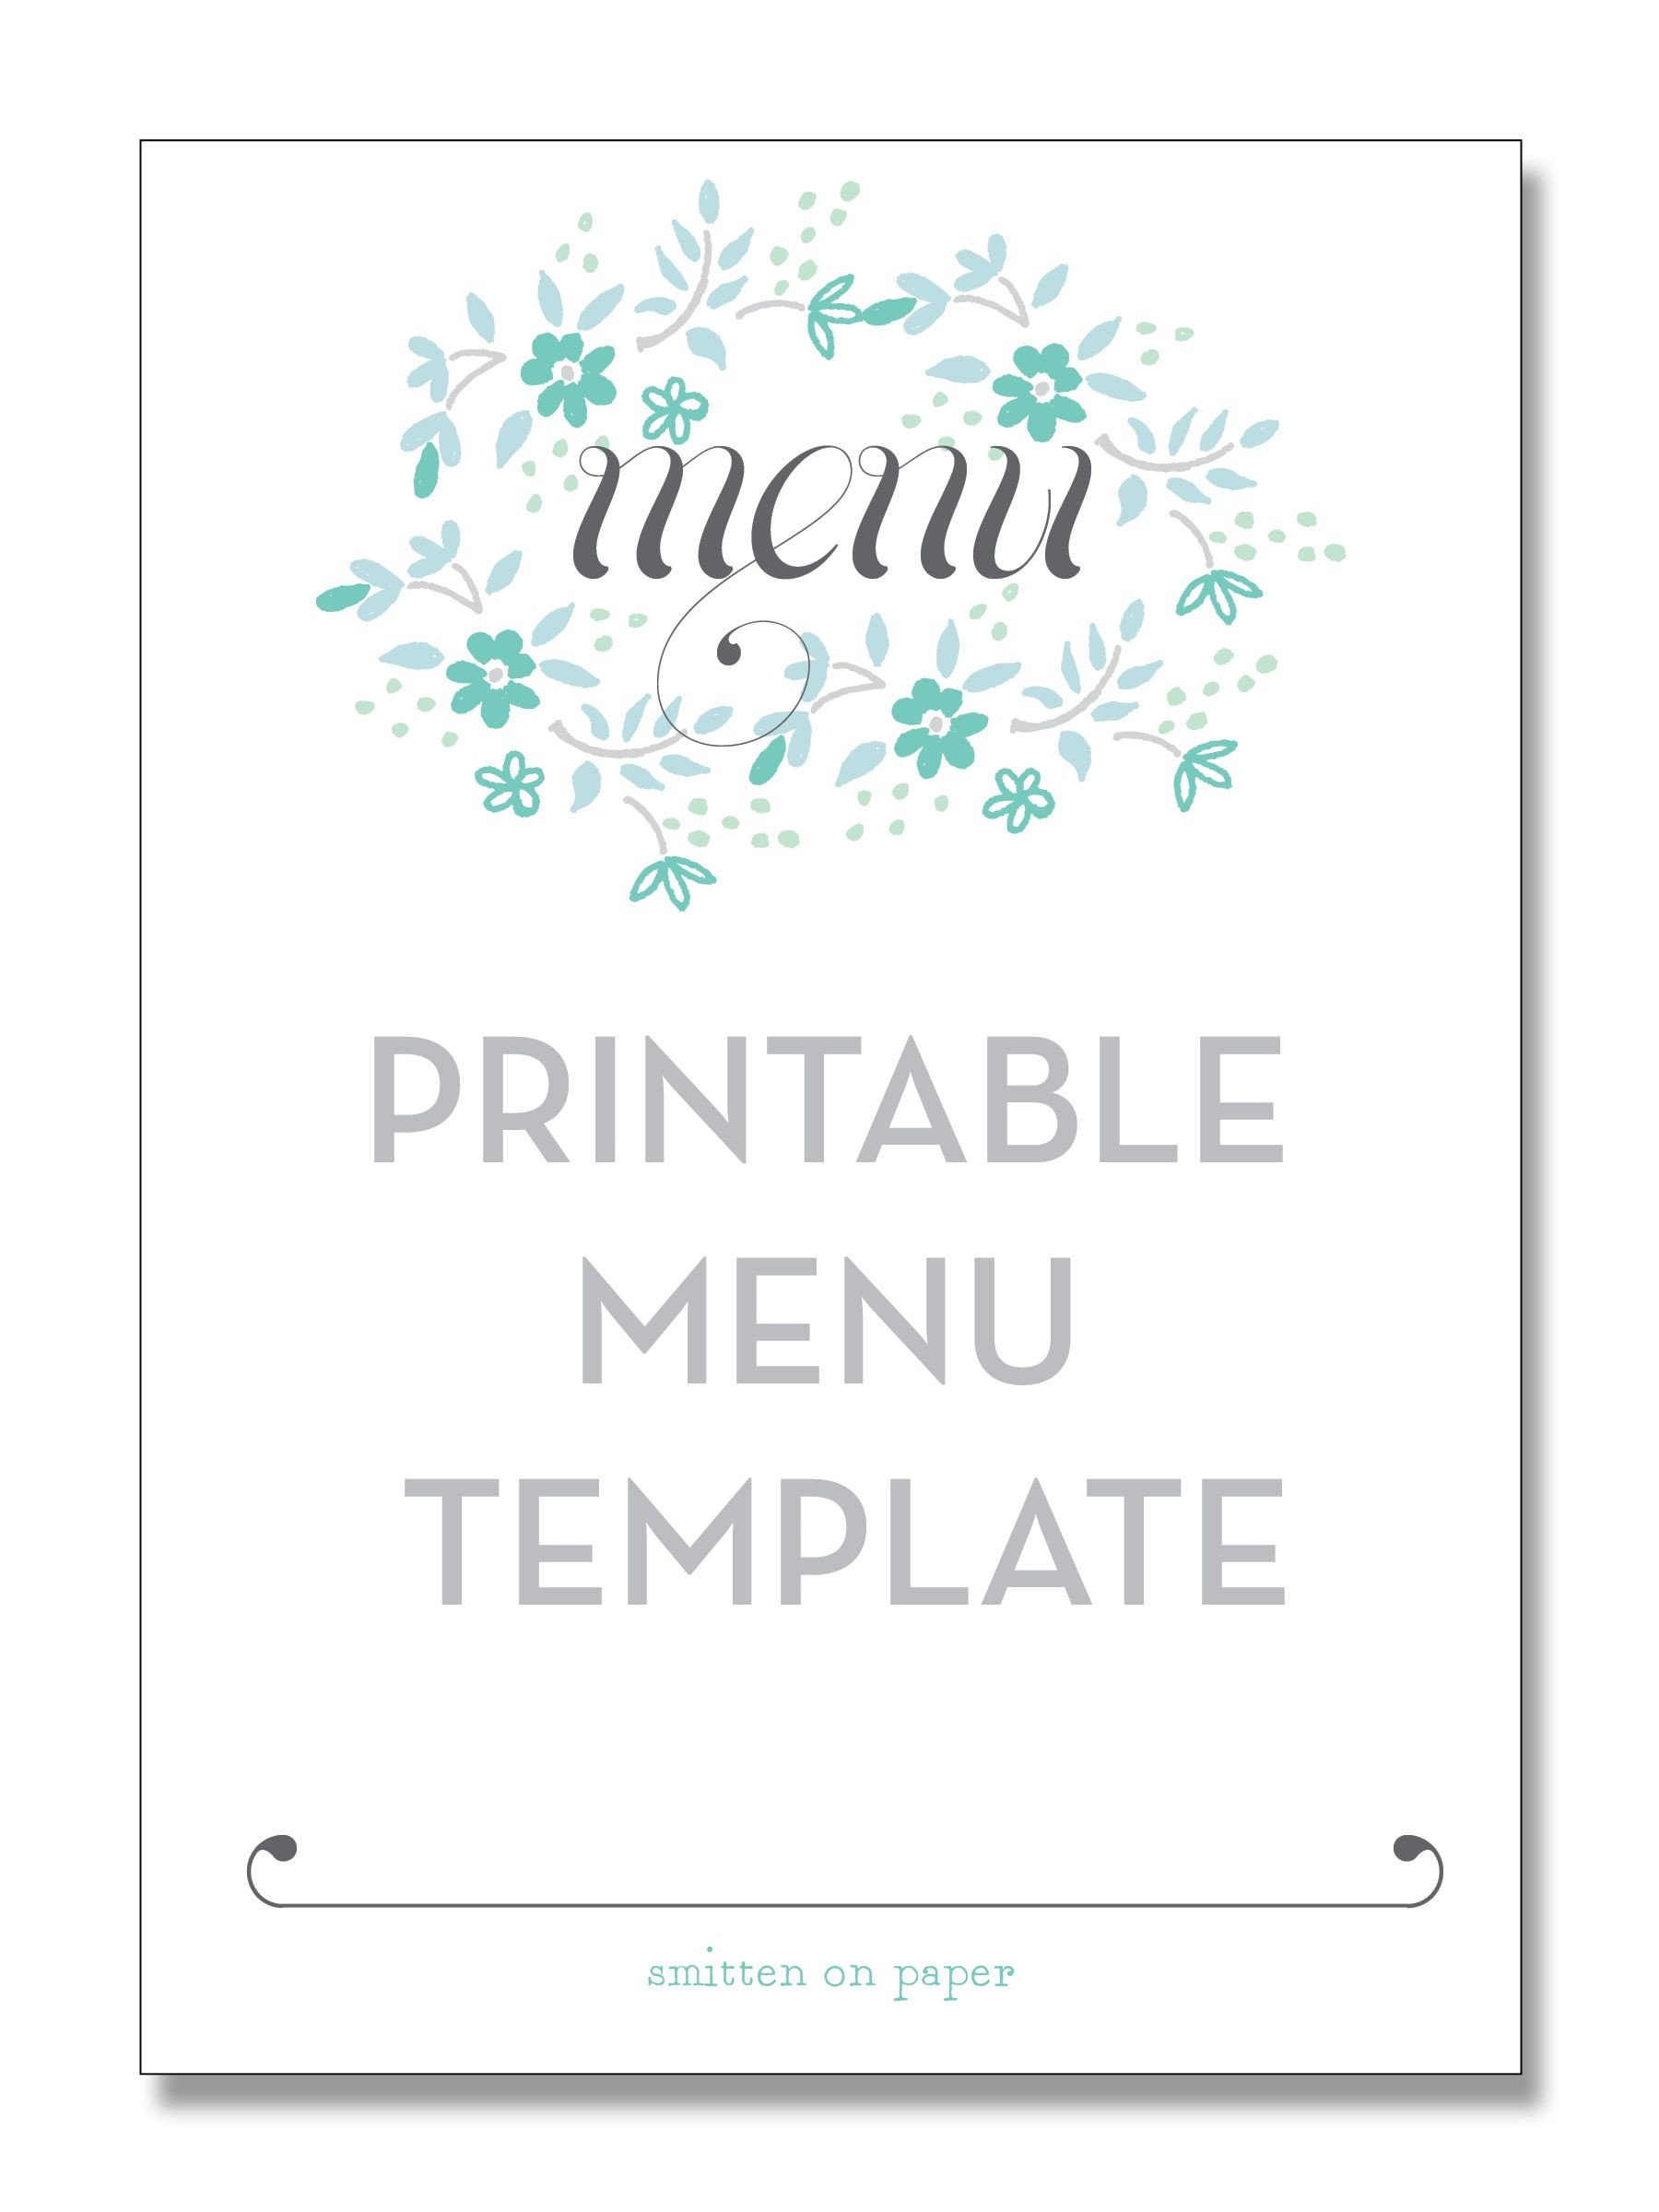 Printable Menu Template from Smitten on Paper